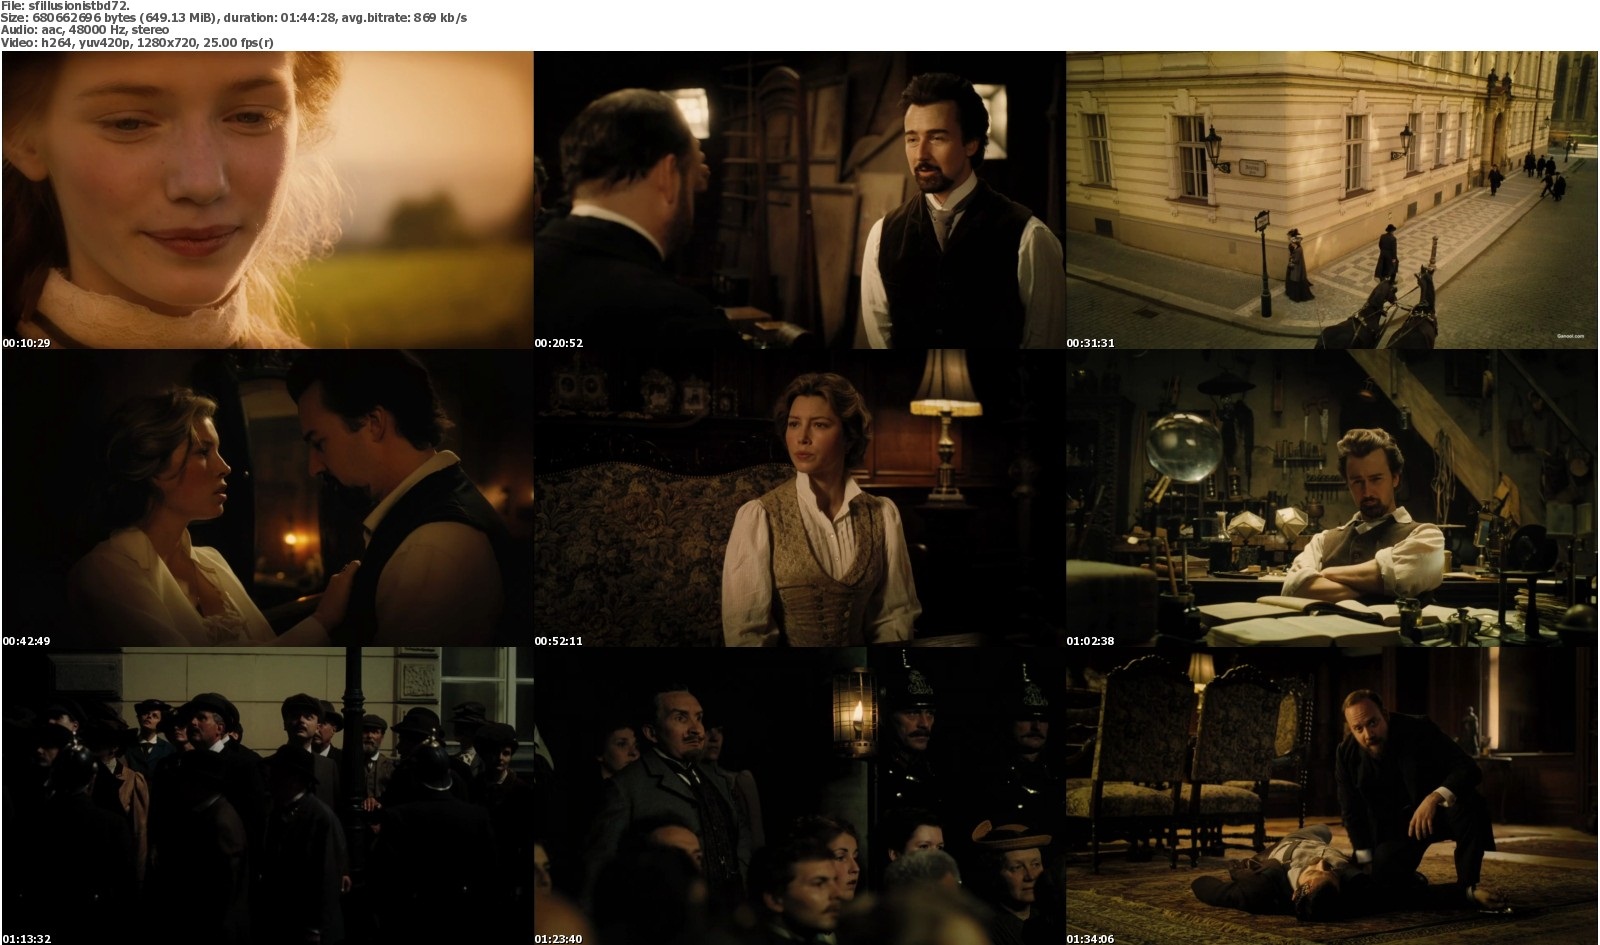 http://4.bp.blogspot.com/-vy5t9b9-Hl8/Tn2ghFE-jZI/AAAAAAAABAw/No56_zyBdK8/s1600/The+Illusionist+%25282006%2529+BluRay+720p+650MB.jpg